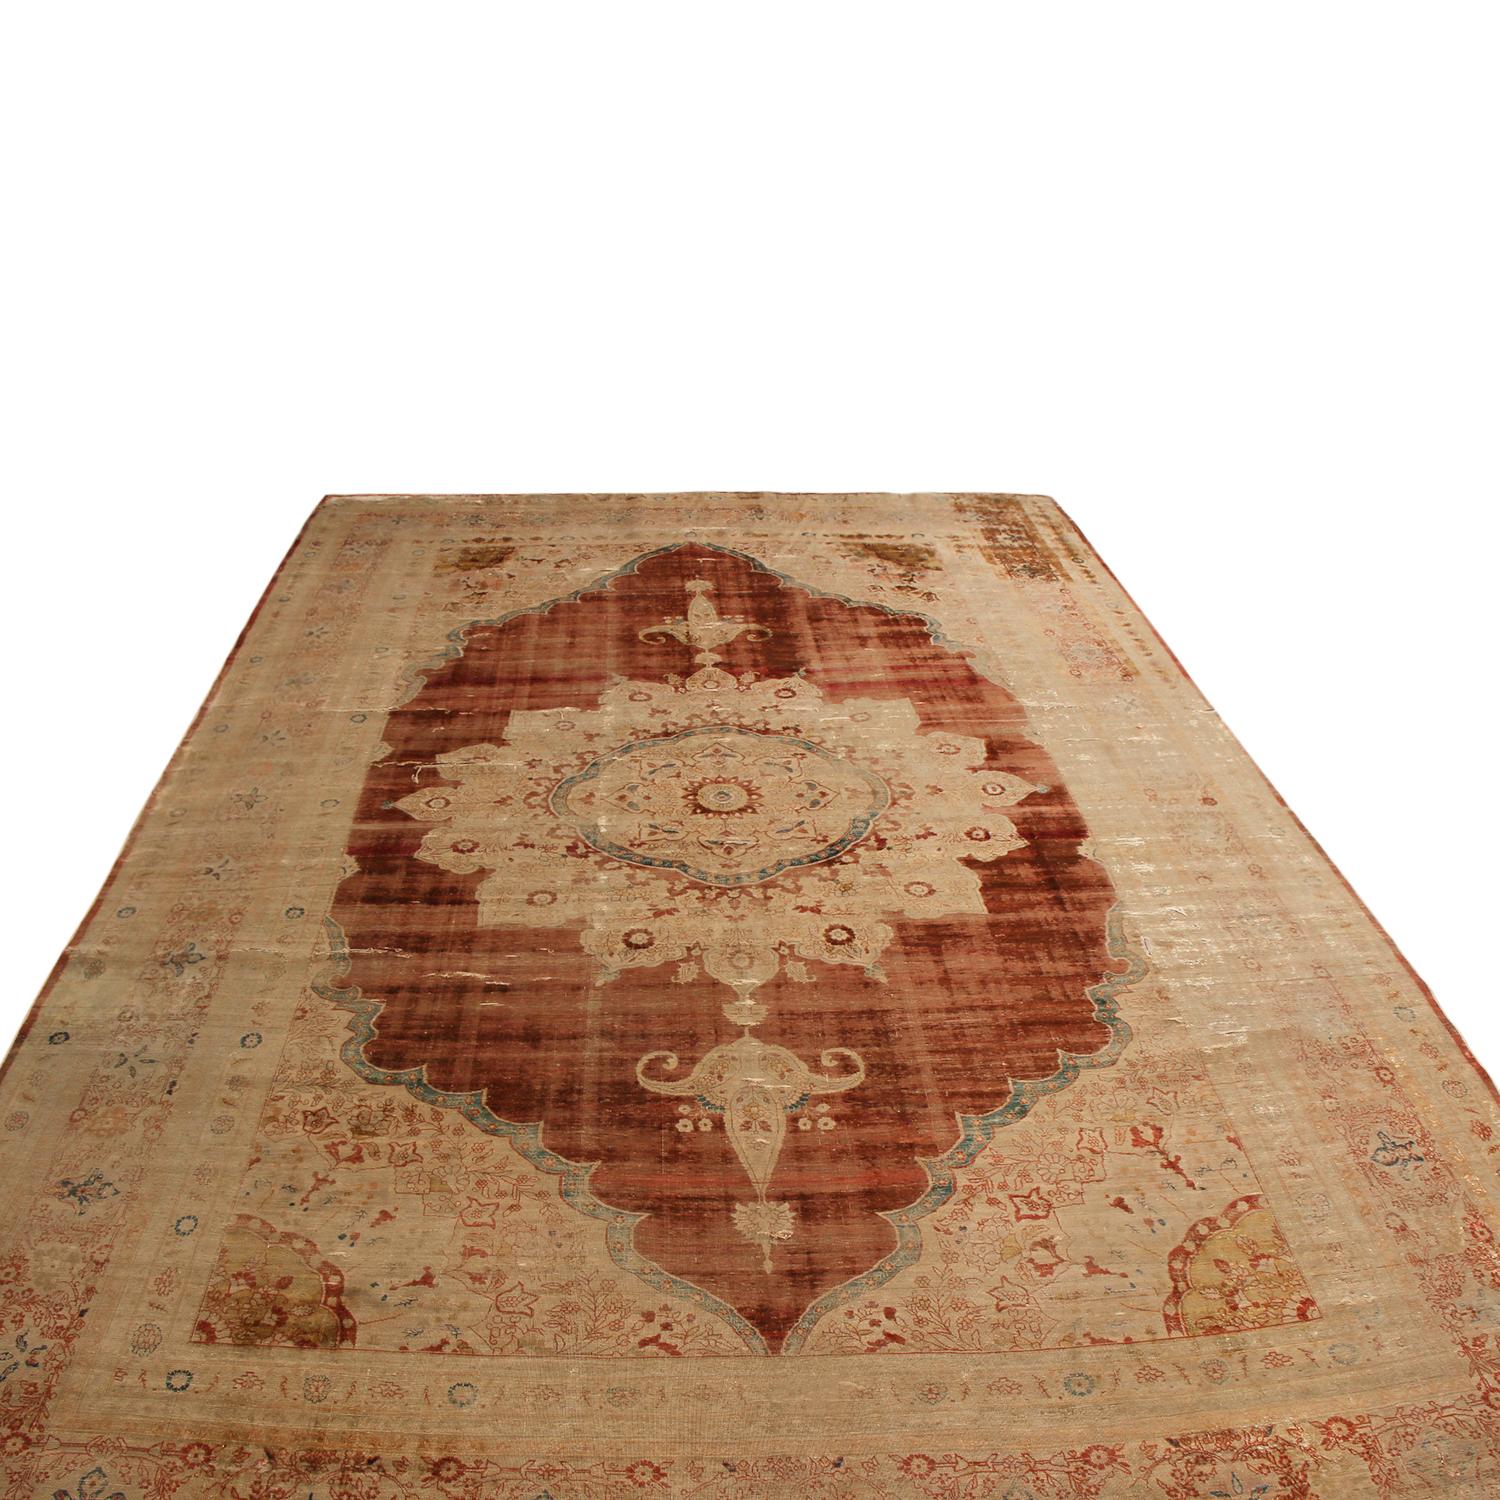 Hand knotted in luminous, high-quality silk originating from Persia in 1890, this antique Kerman Persian rug hails from one of the most widely recognized cities of antique and vintage Persian carpet making. Celebrating a simple but elegant field